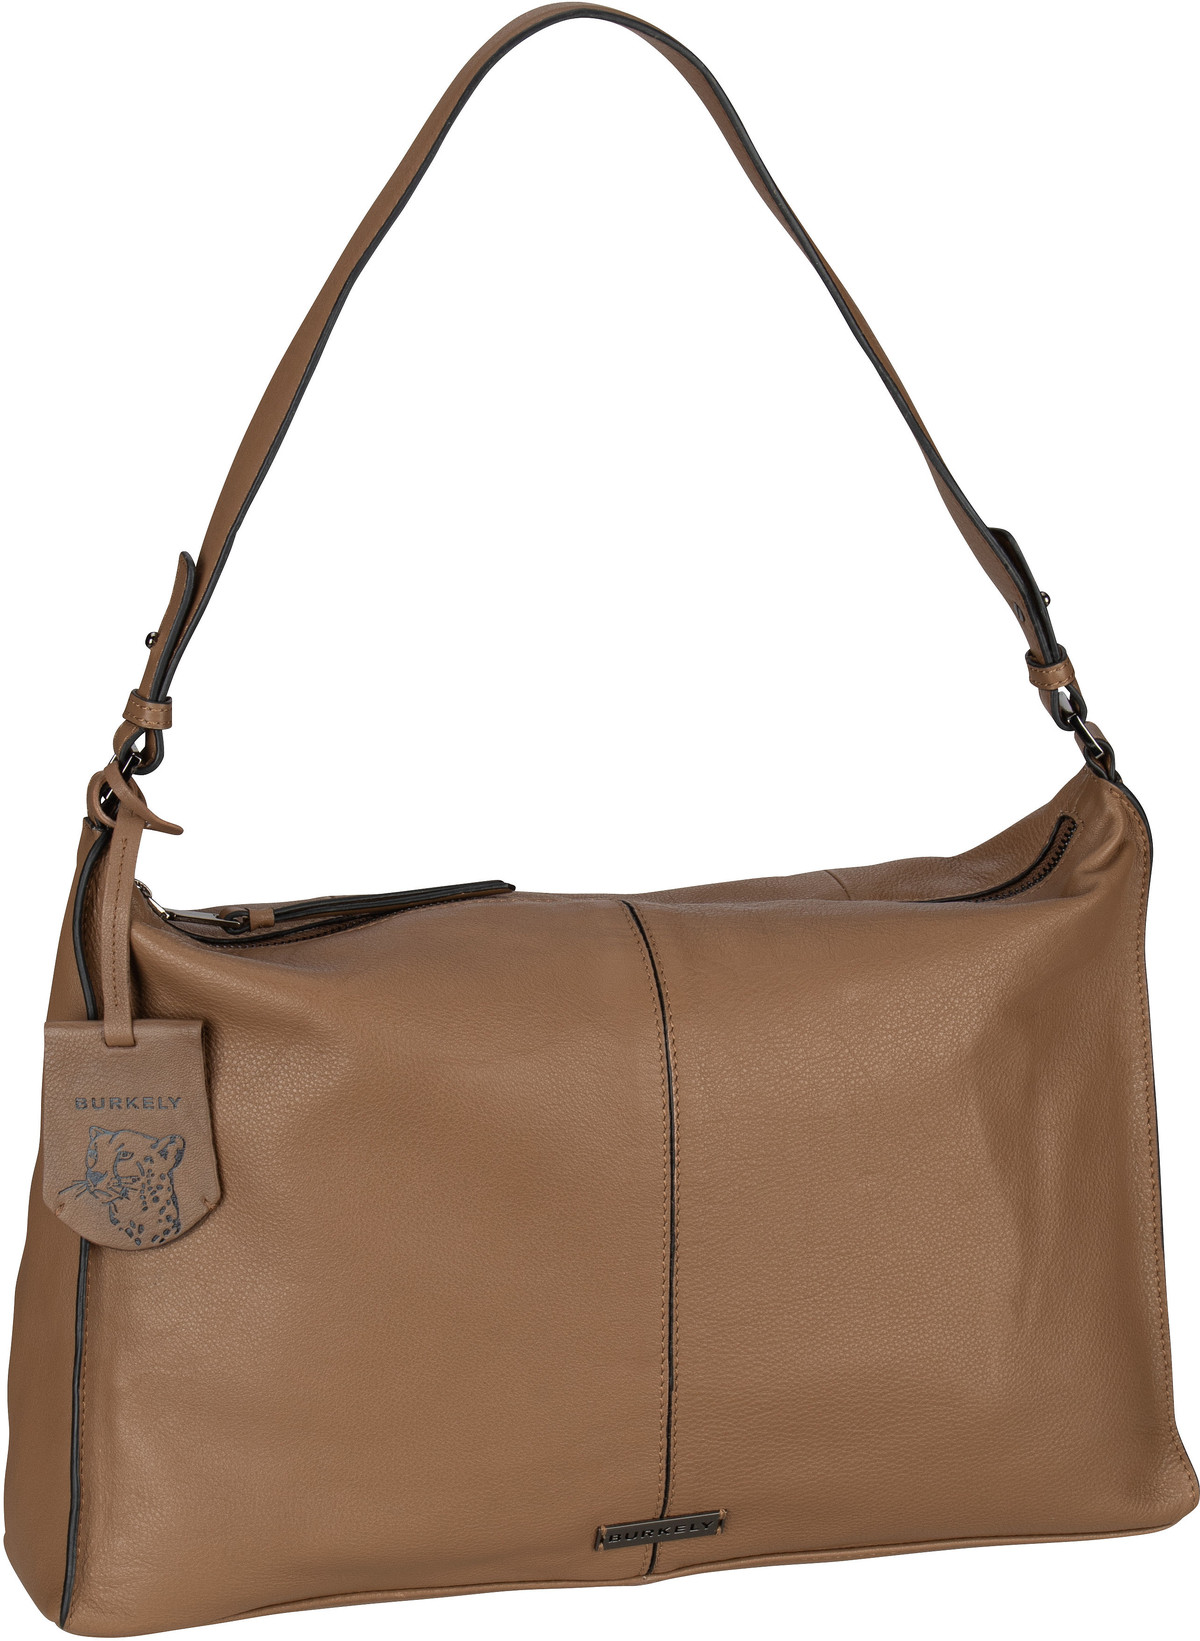 Burkely Mystic Maeve Wide Hobo  in Taupe (9.2 Liter), Beuteltasche